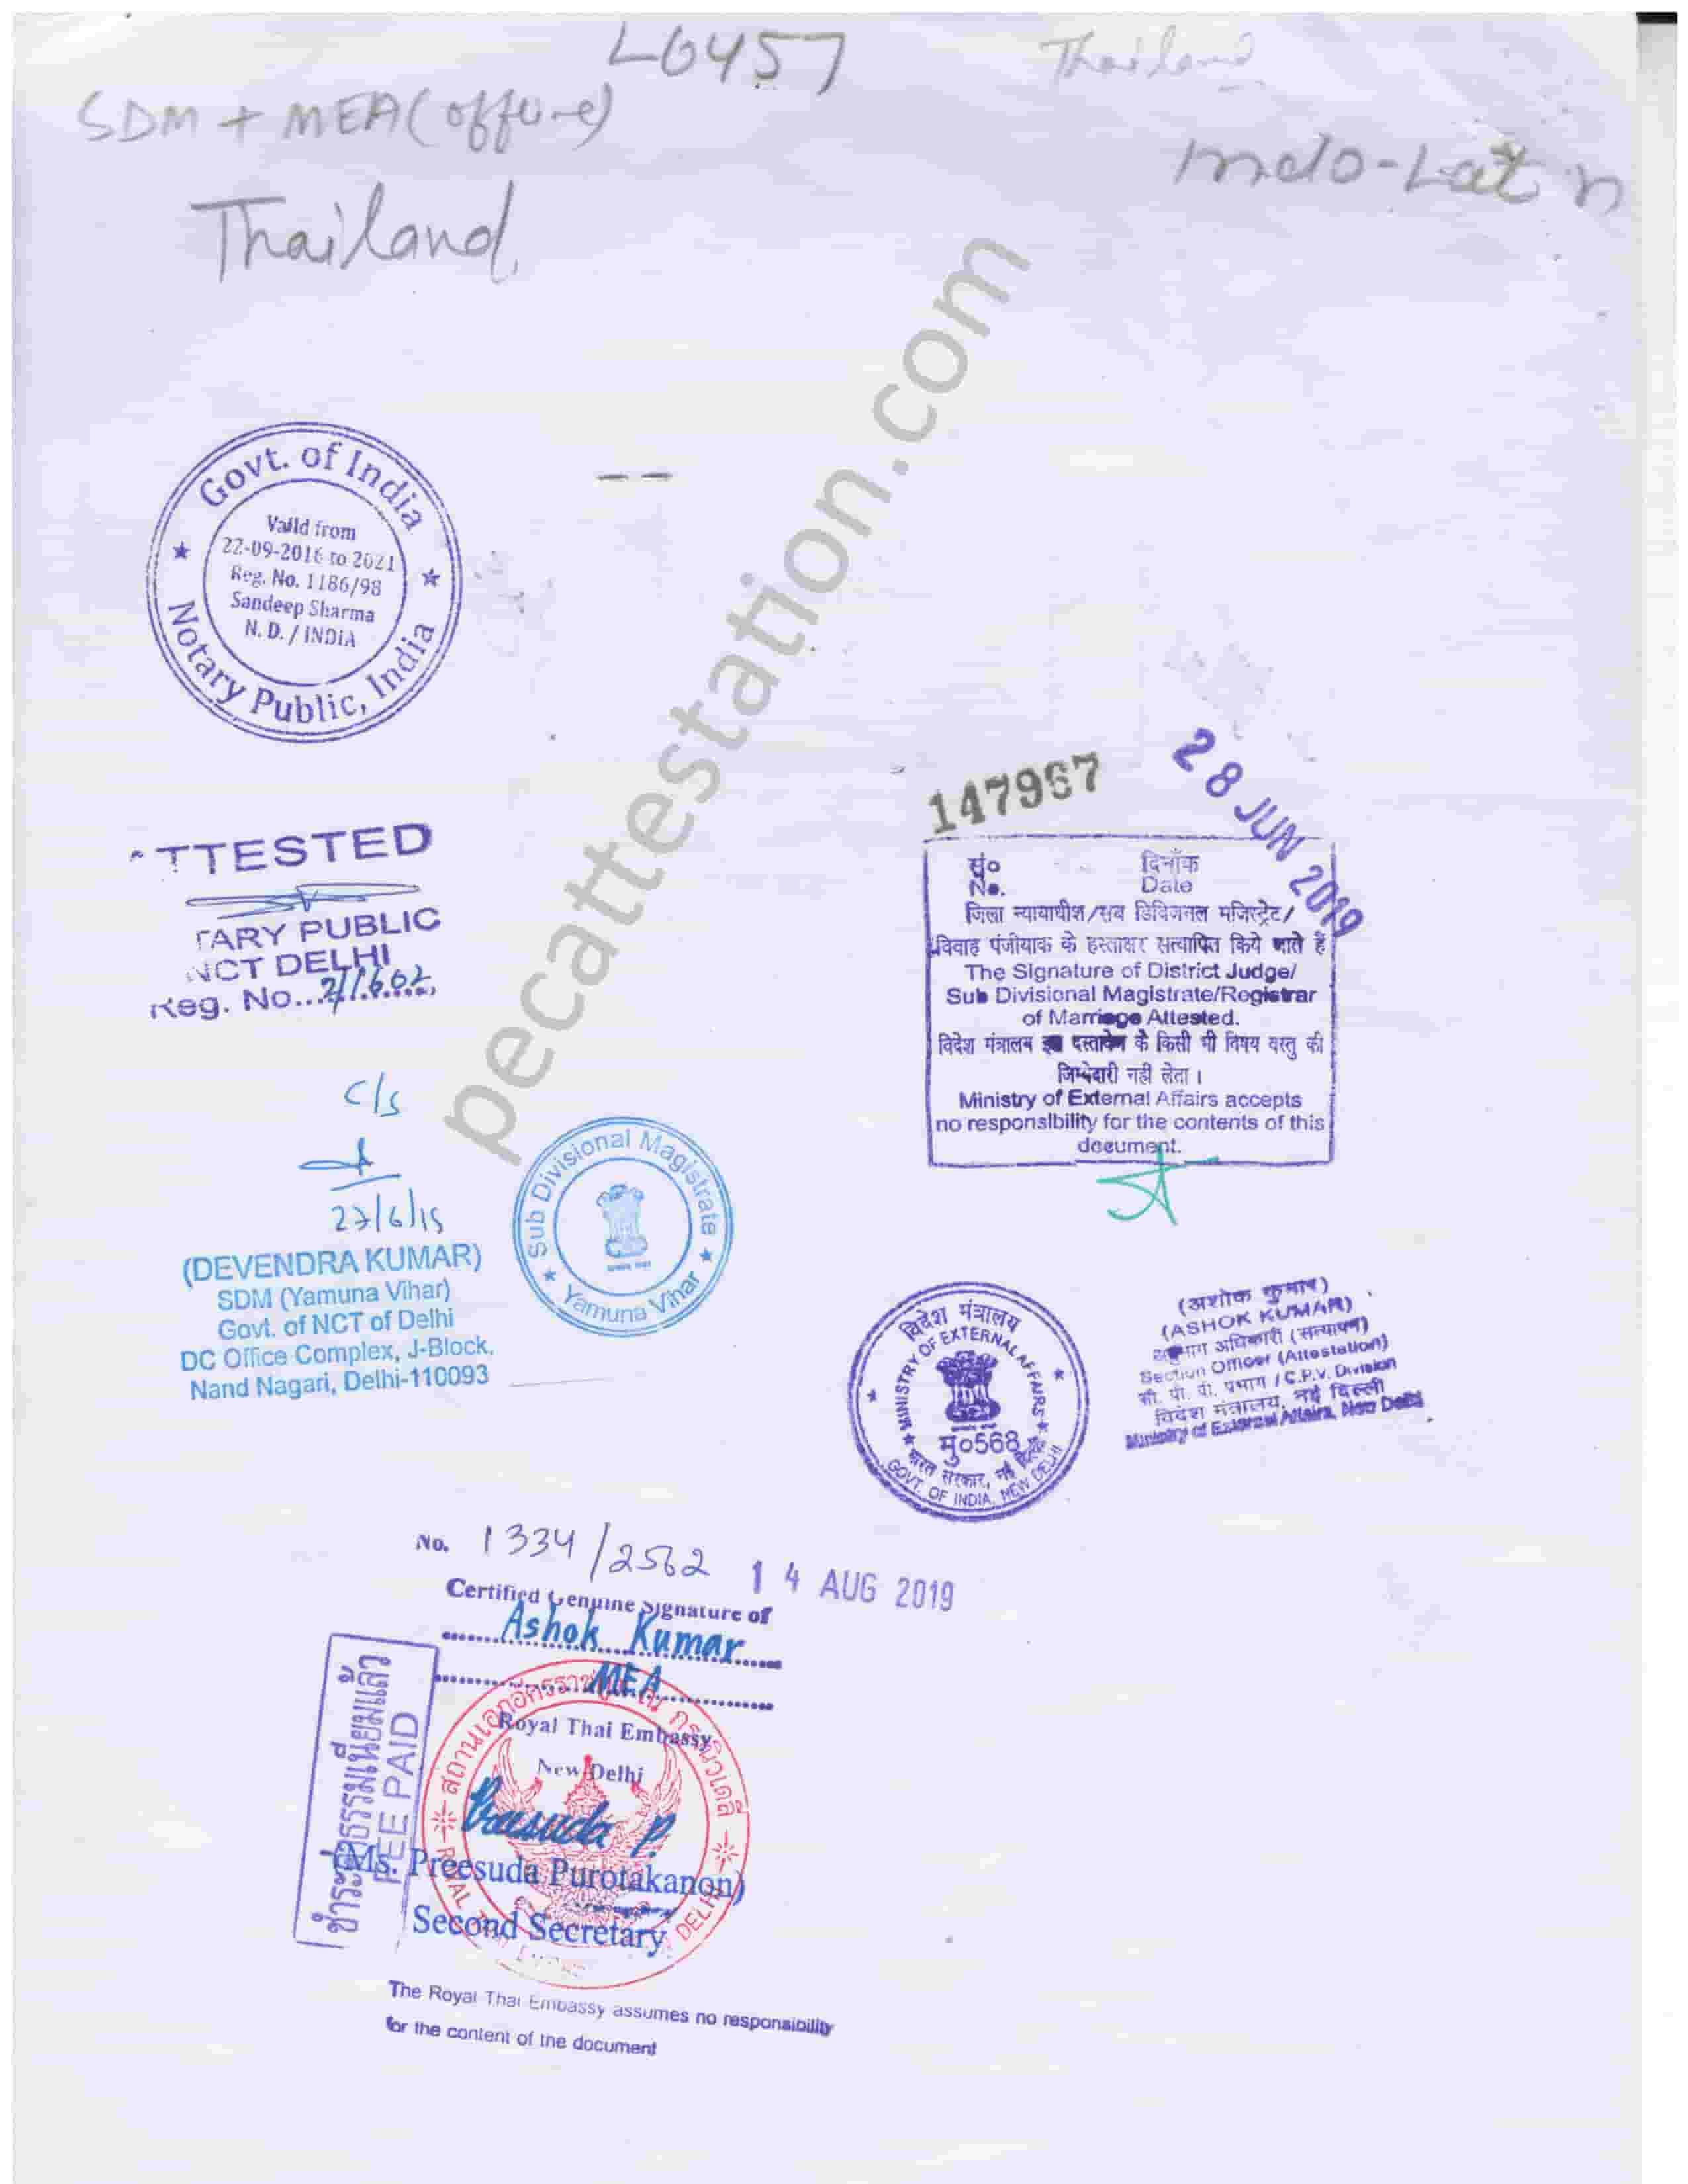 Personal document attestation for thailand